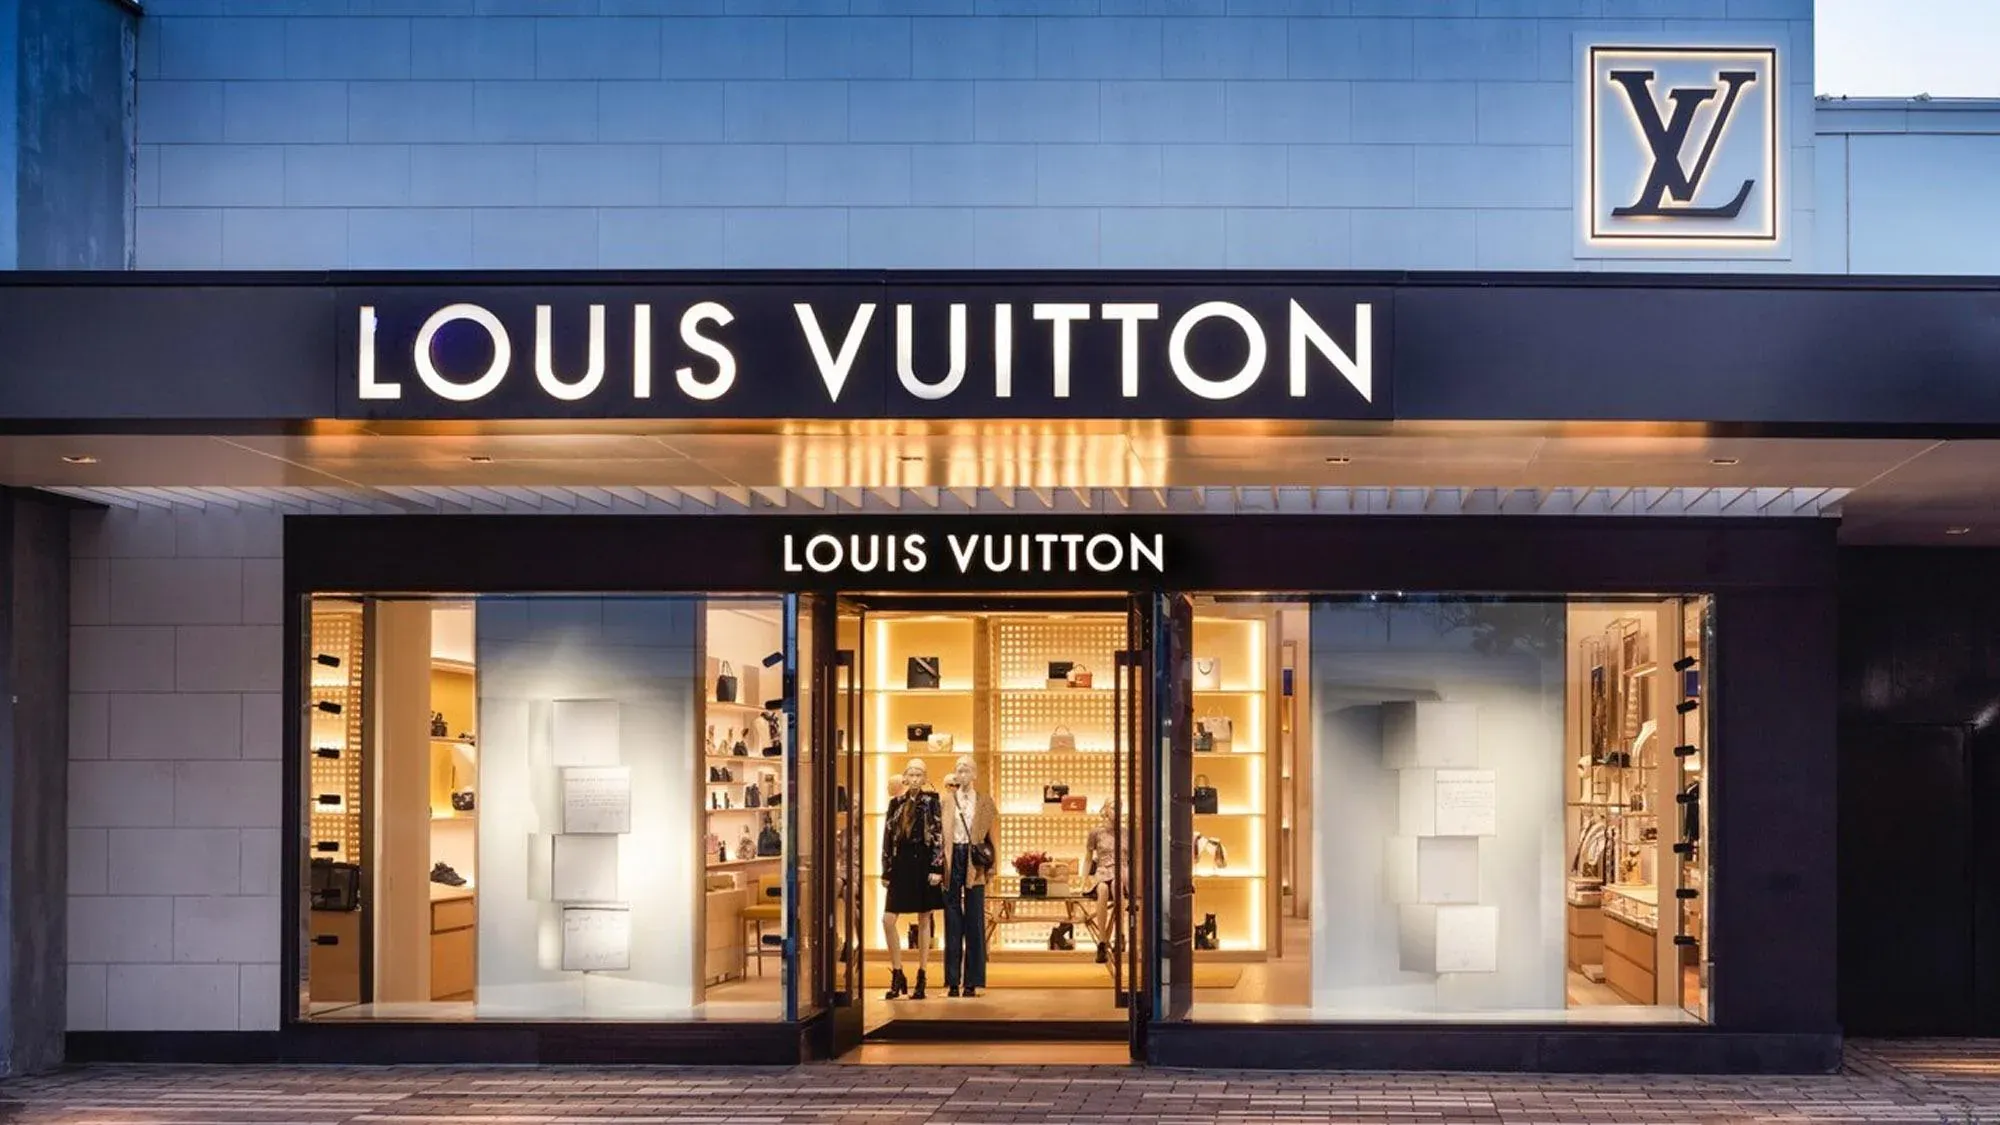 Group steals Louis Vuitton bags from mall